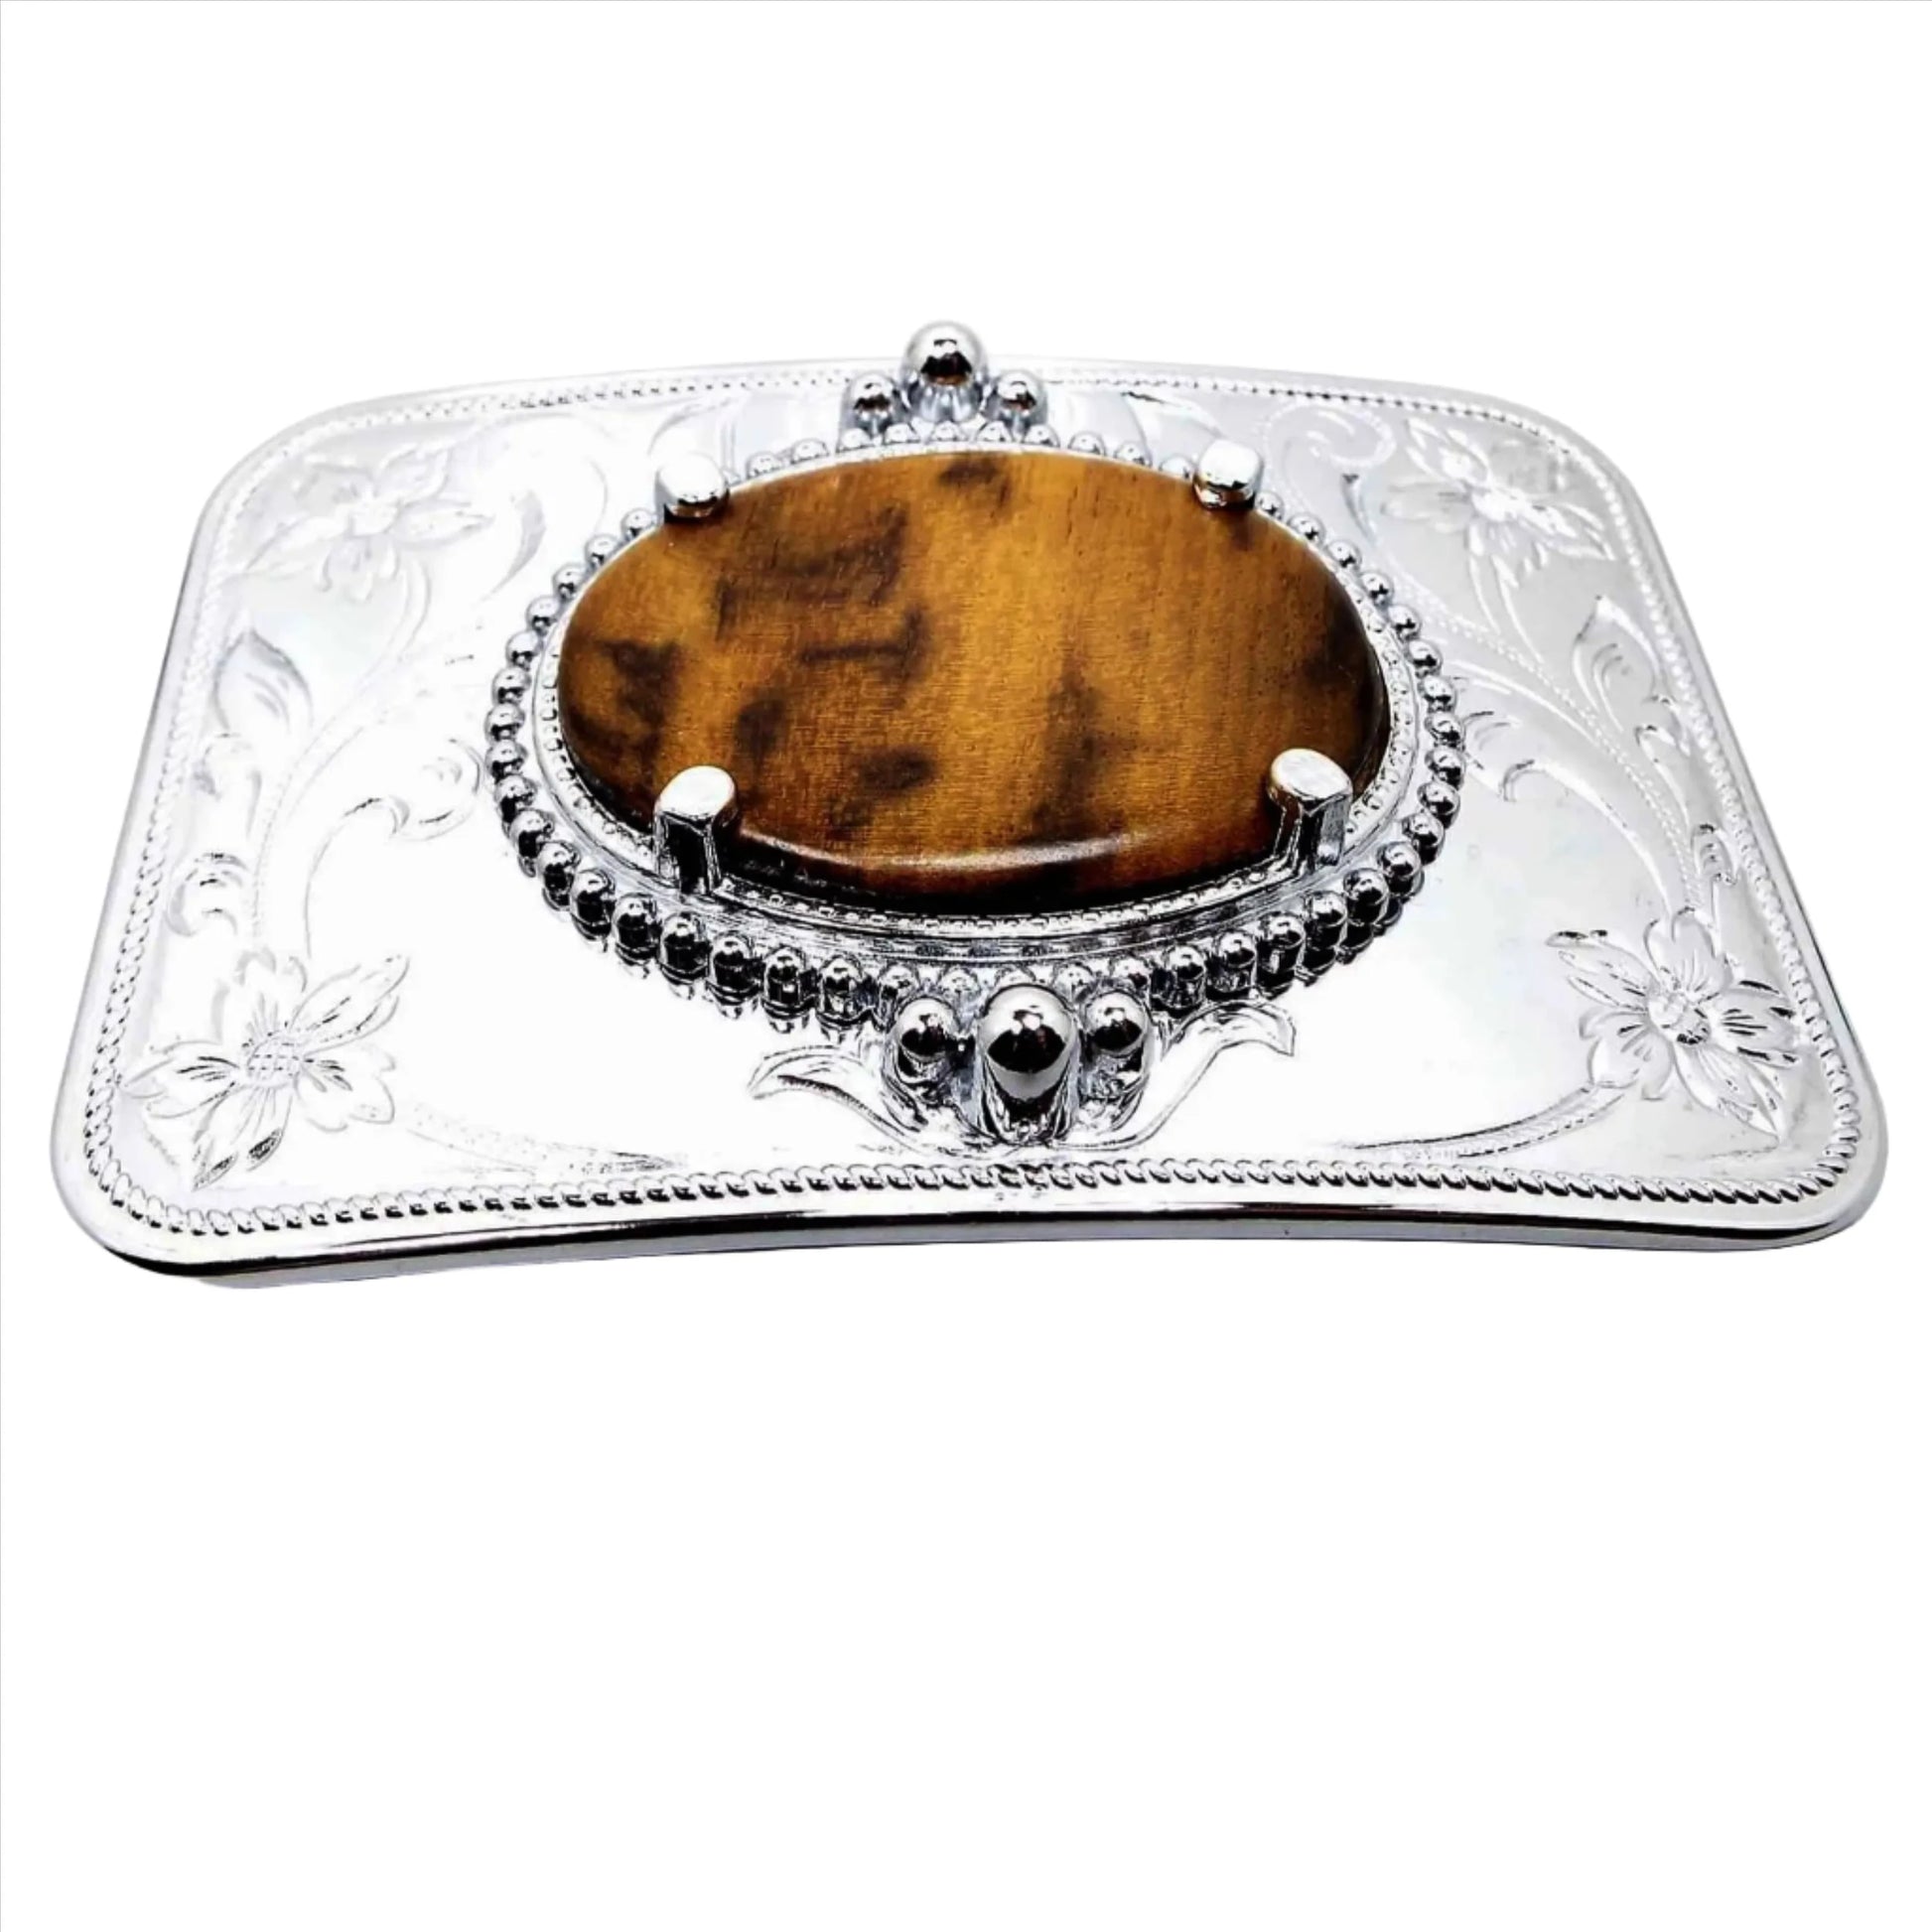 Front view of the retro vintage Reddscraft myrtlewood vintage belt buckle. The buckle is silver tone in color with a stamped floral design around the corners. The middle has a prong set oval cab of myrtlewood wood in shades of brown.